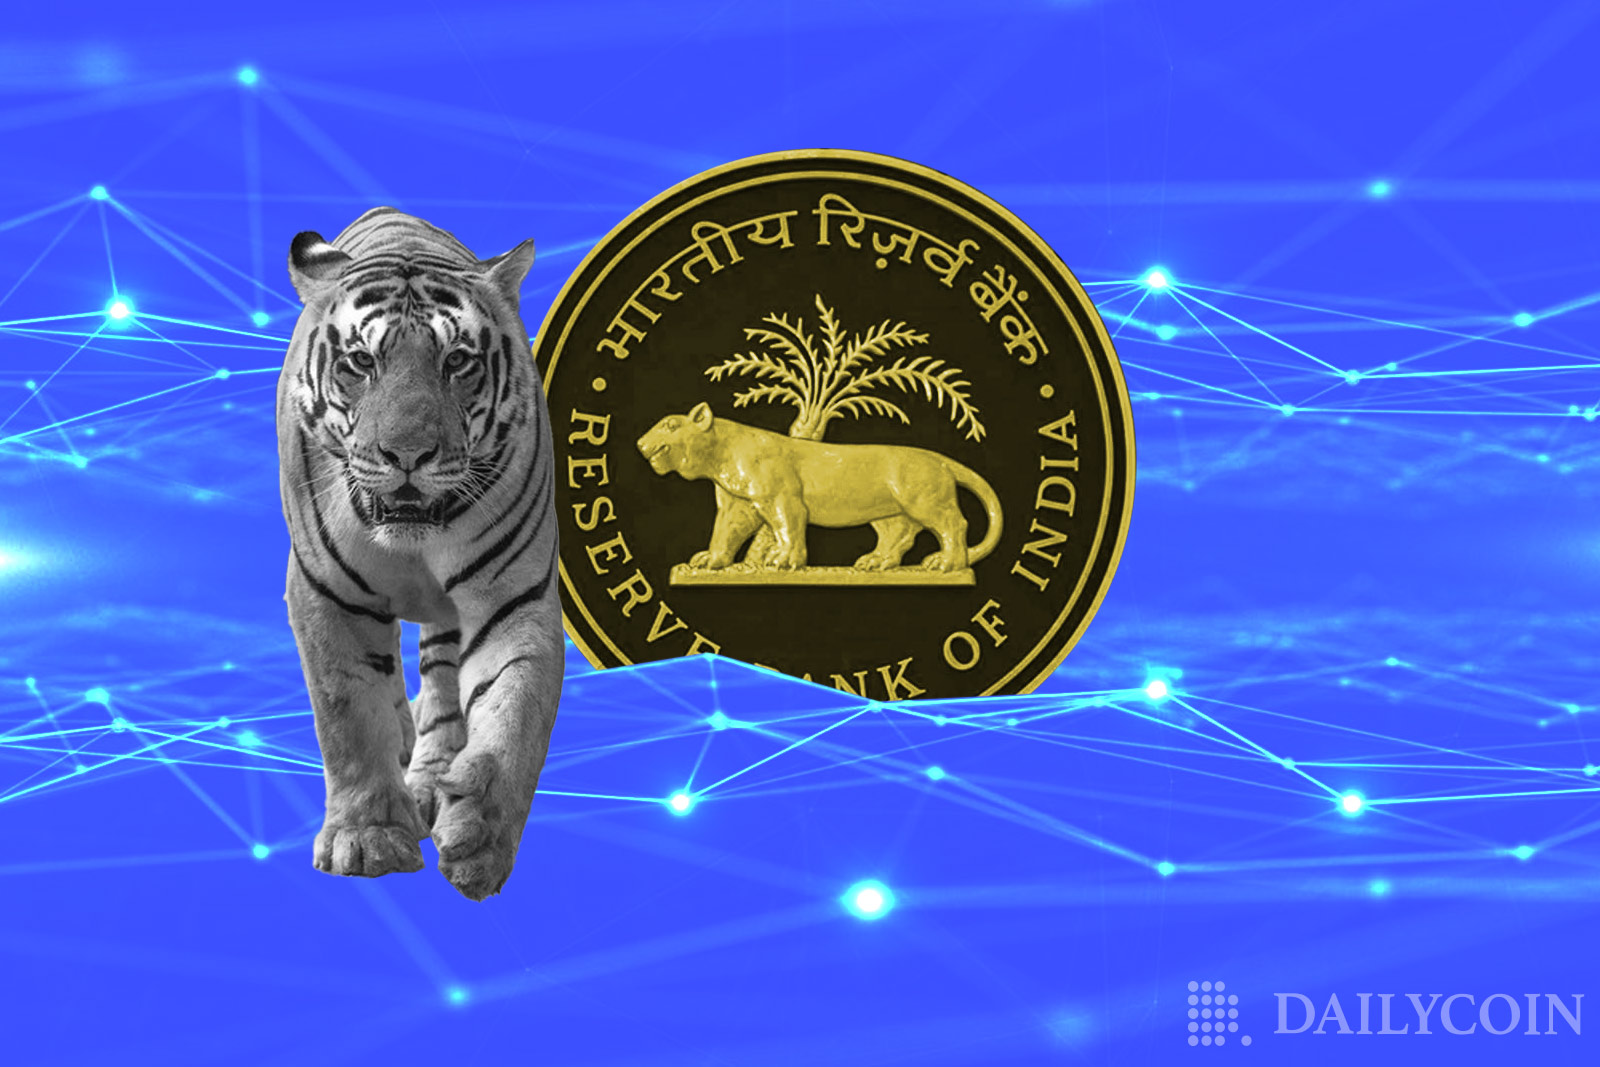 Tiger walking inside of a blockchain next to a CBDC with "Reserve Bank of India" written on it.